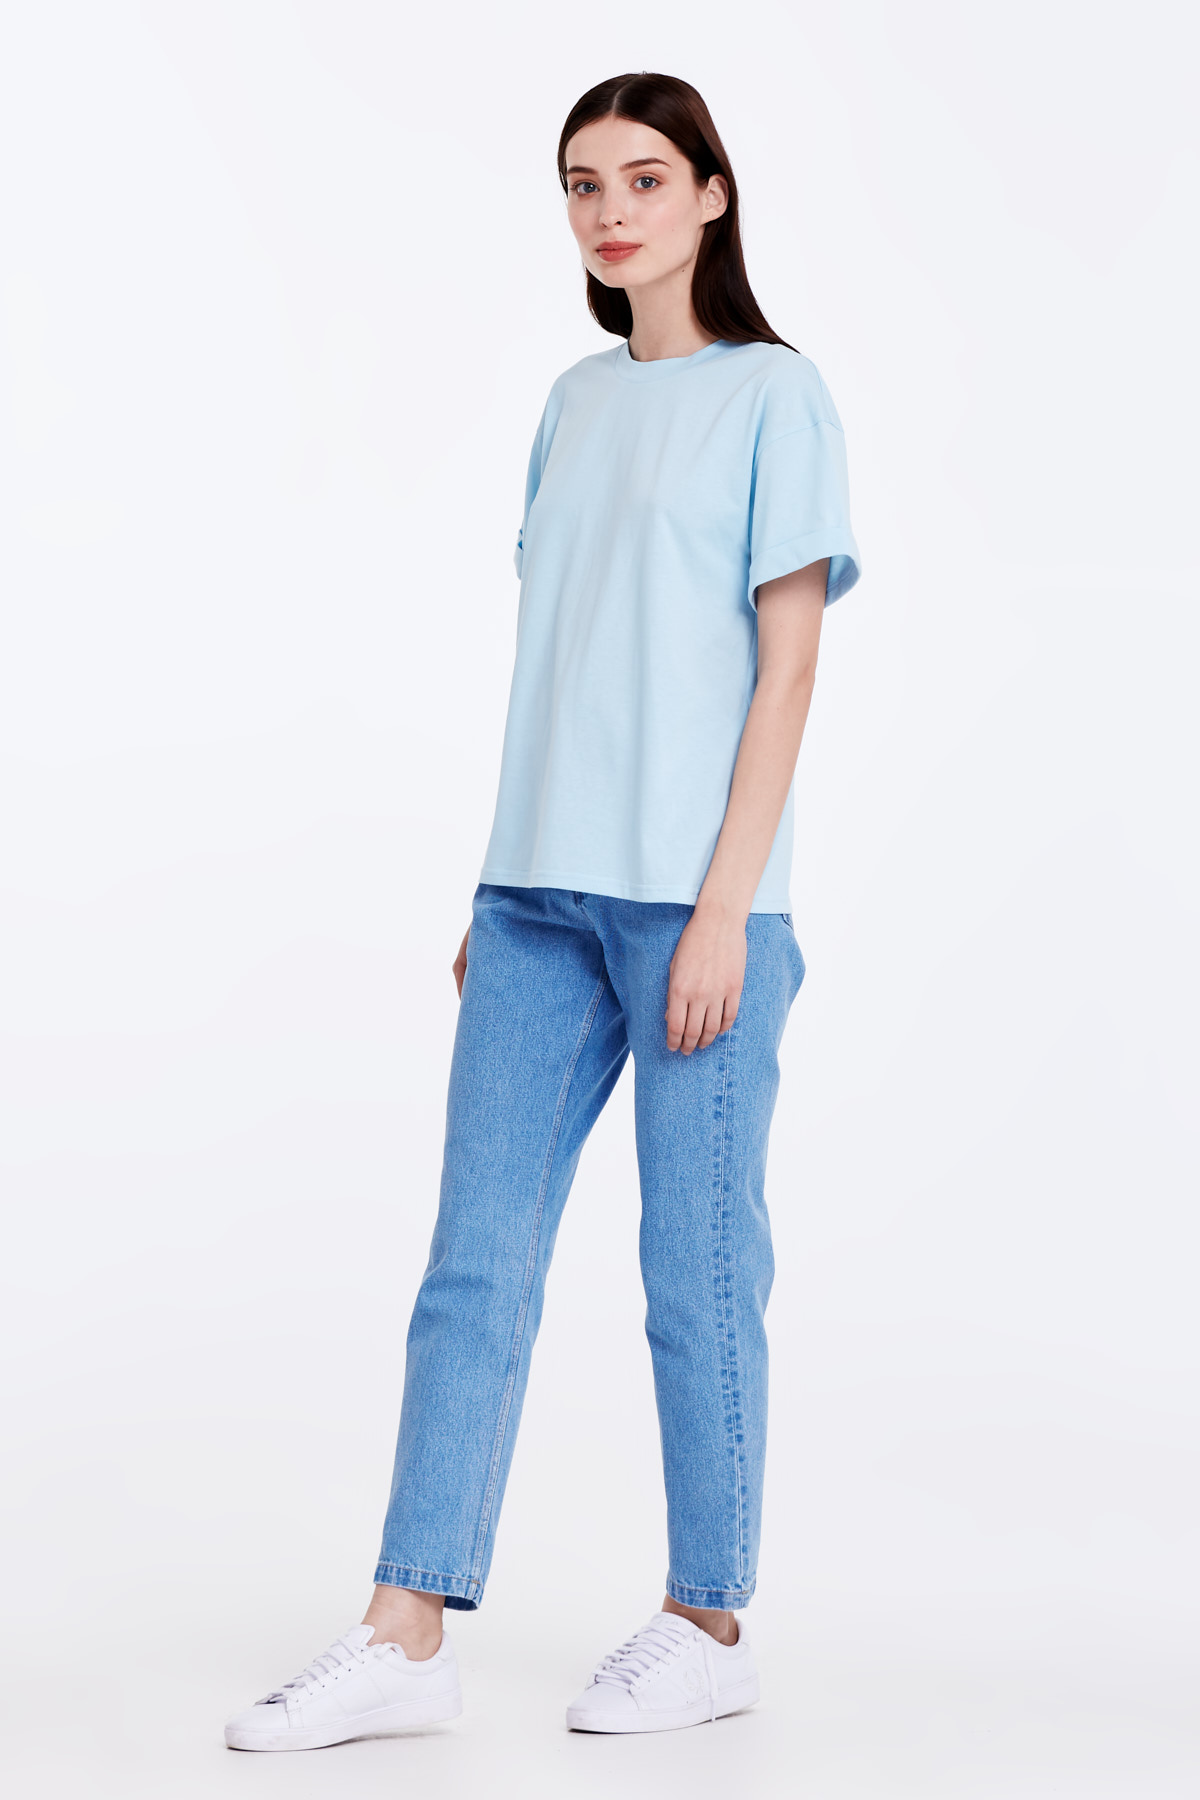 Loose-fitting blue T-shirt with cuffs, photo 3